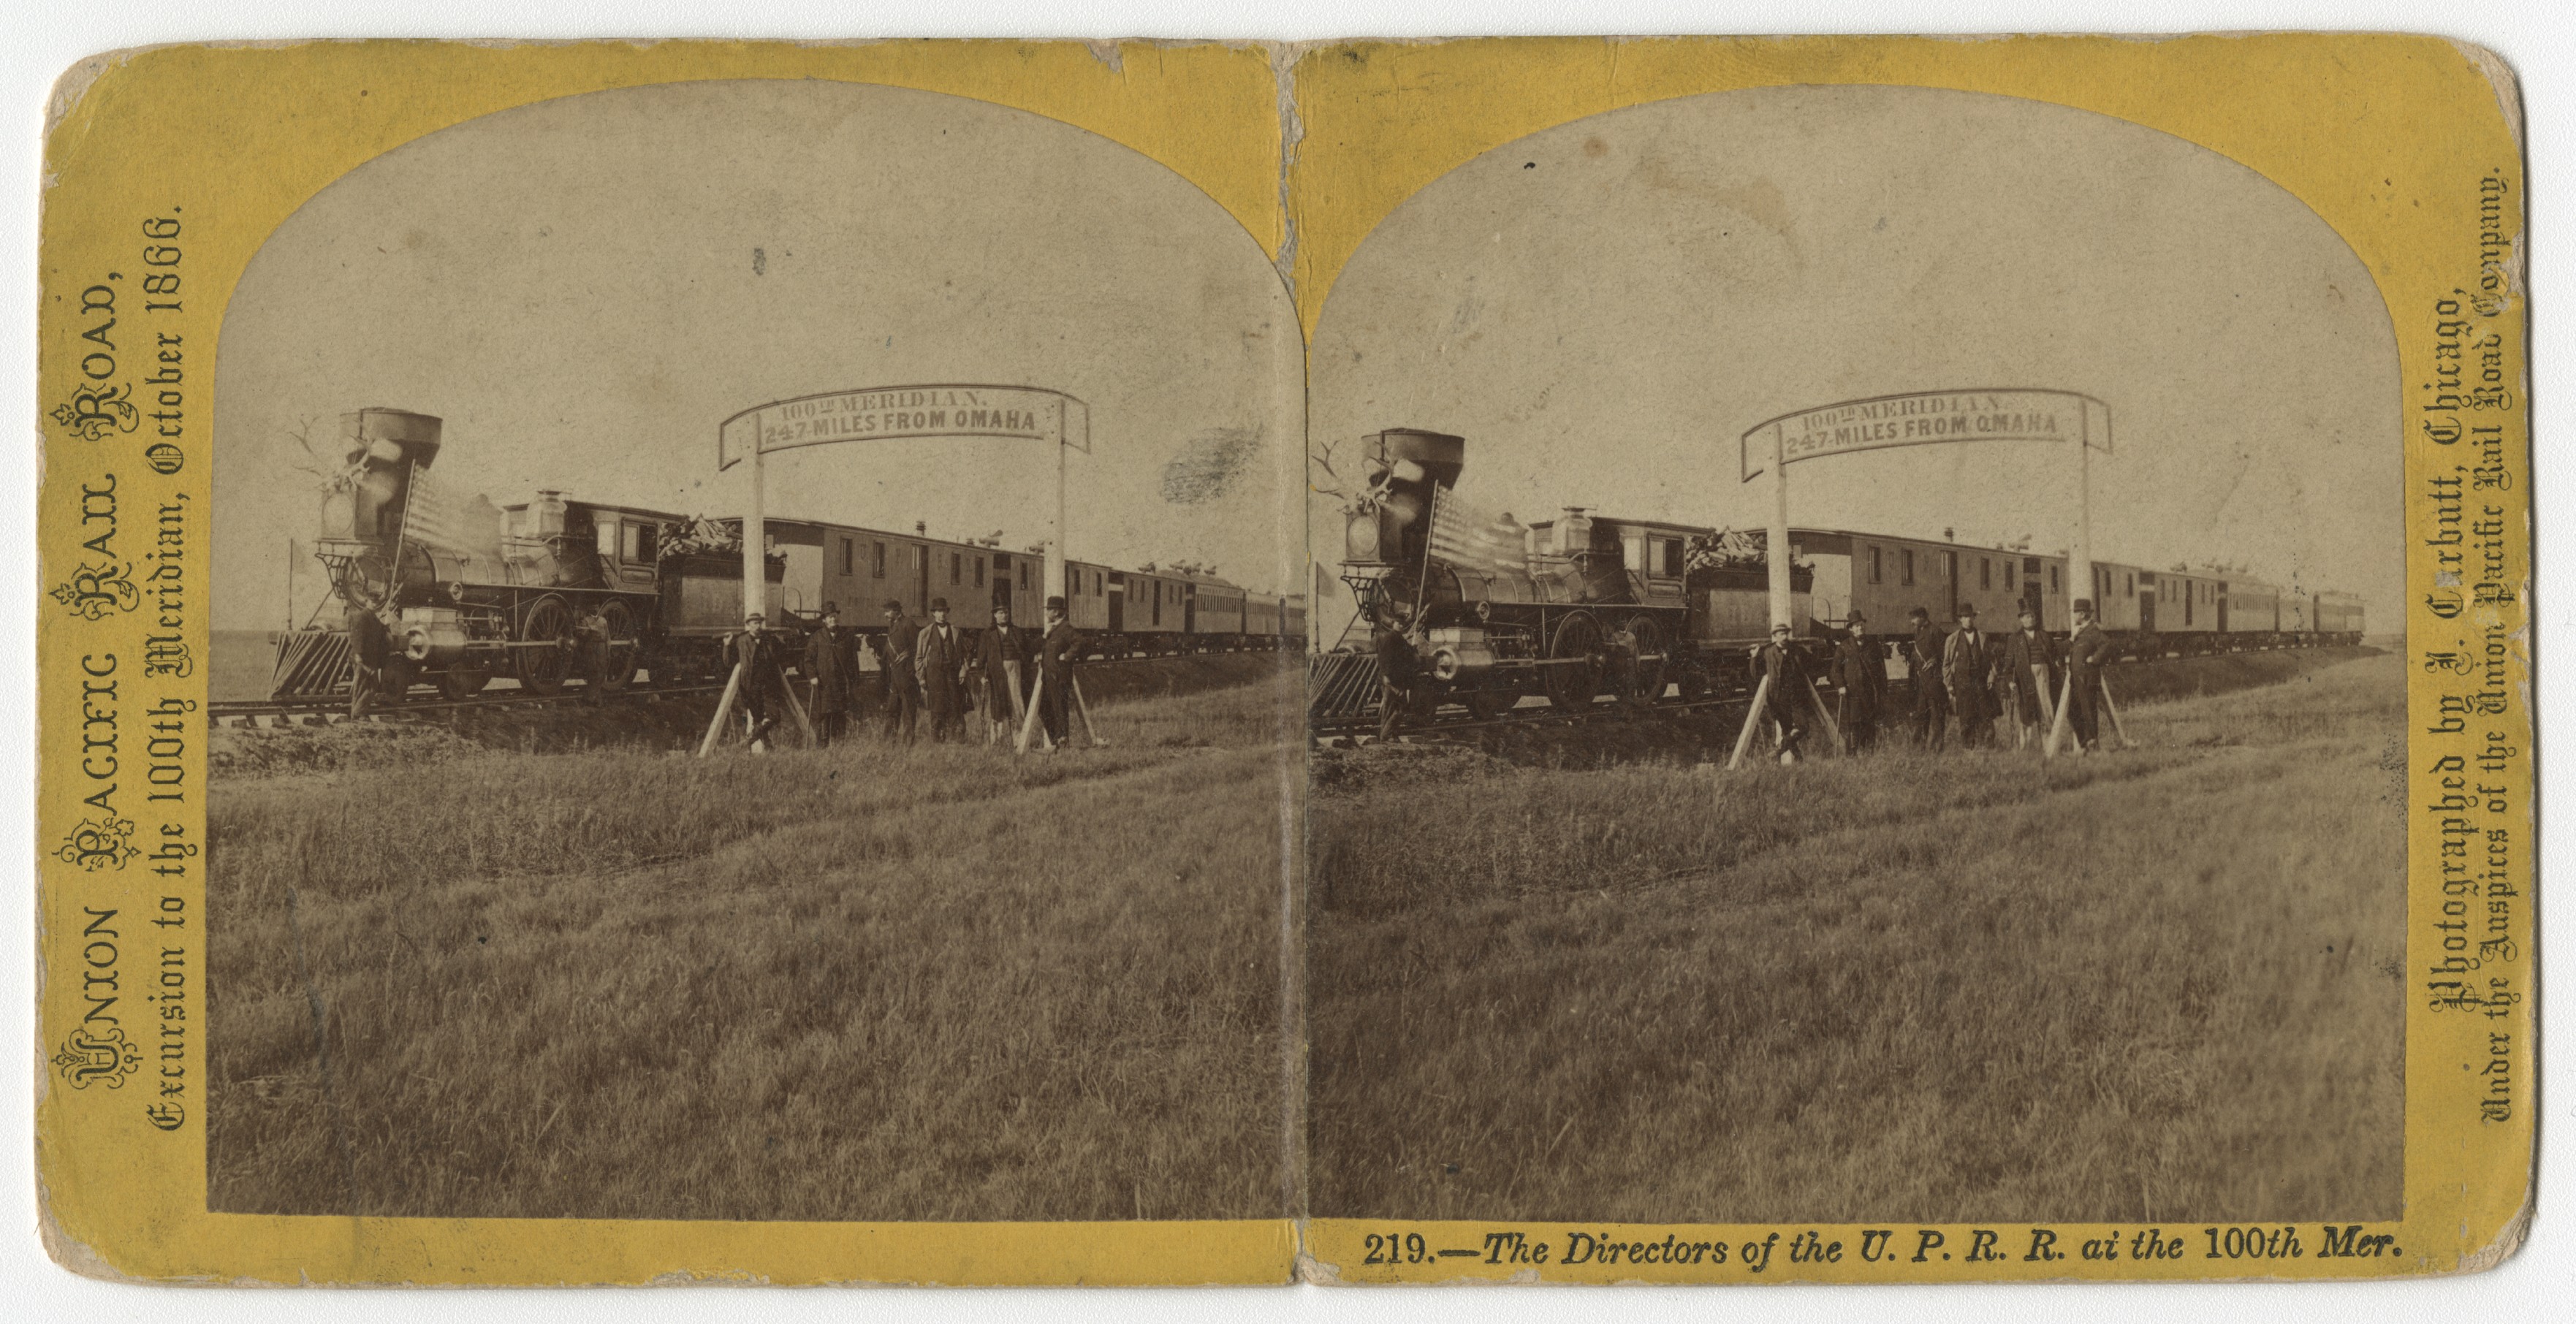 A stereo card of Union Pacific directors gathering beside a steam locomotive